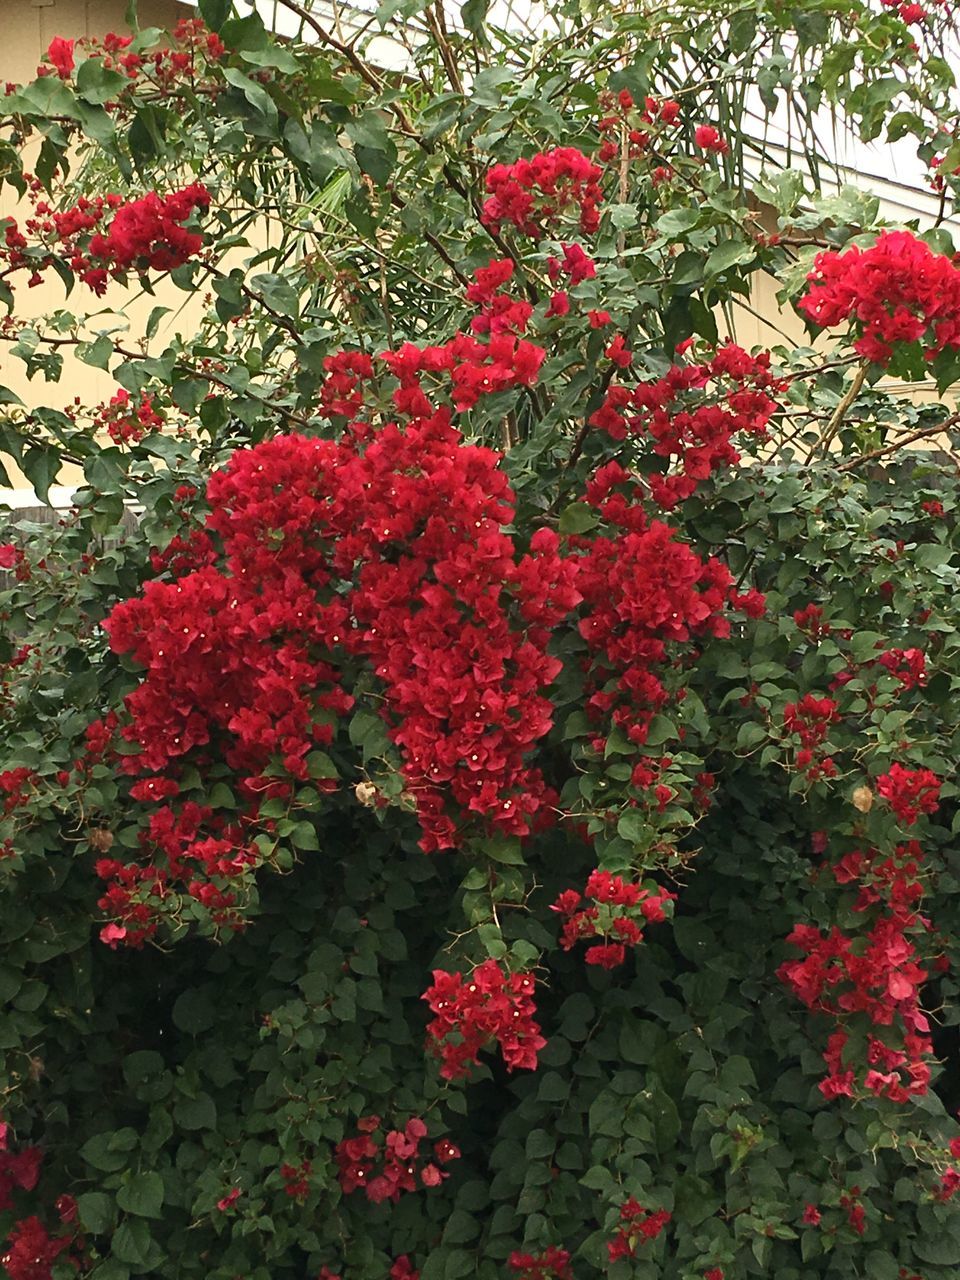 VIEW OF RED FLOWERS